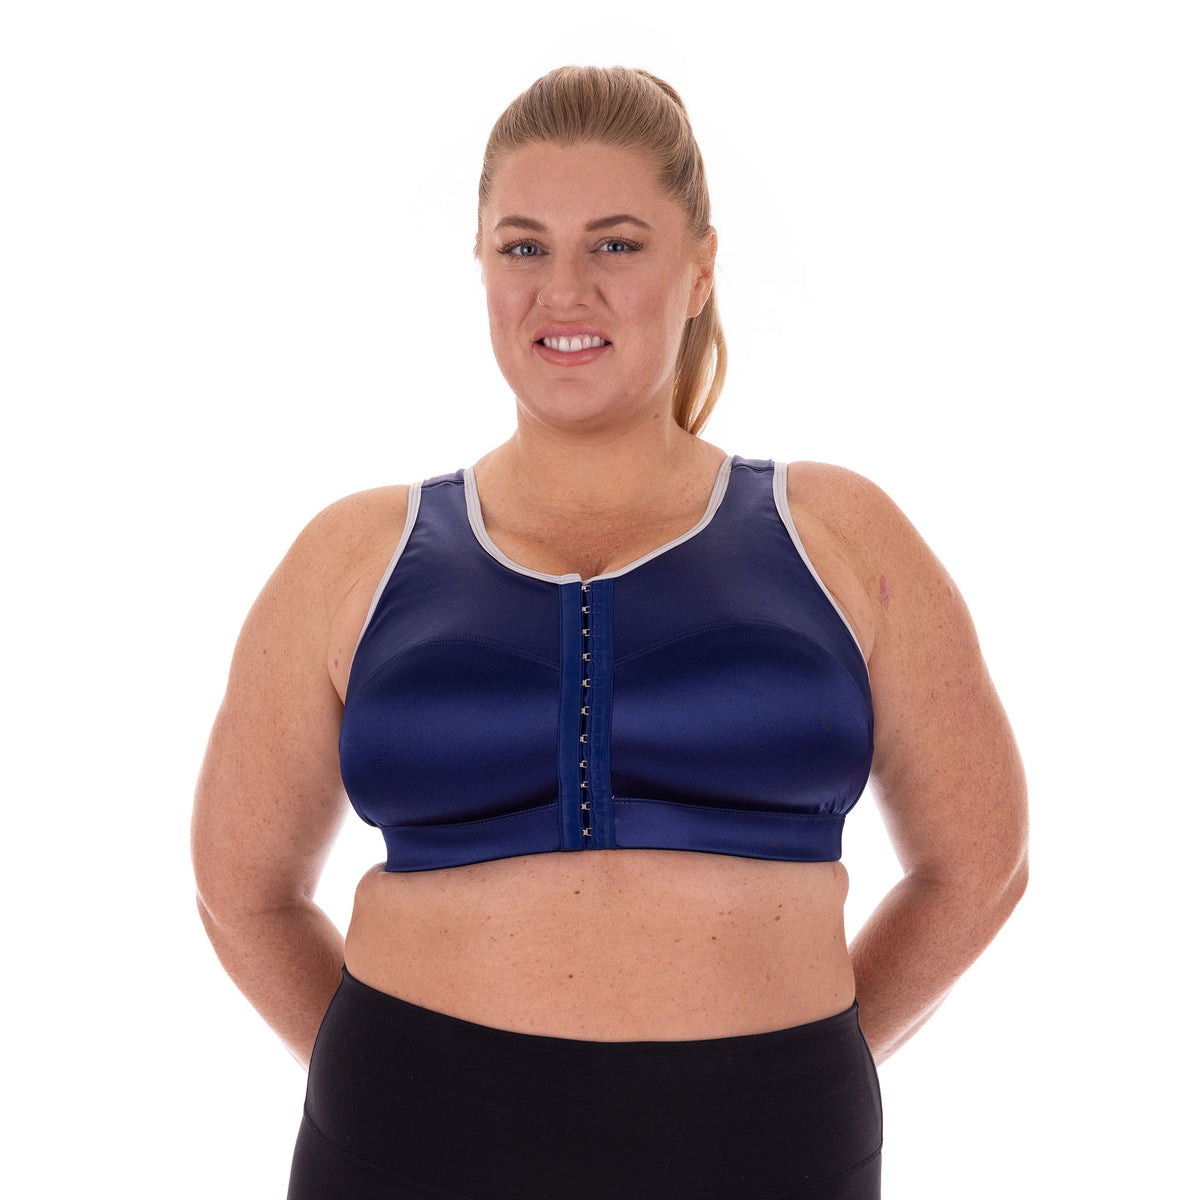 Forlest - Velcro® sports bra will be your fave.🥳✨#veclro